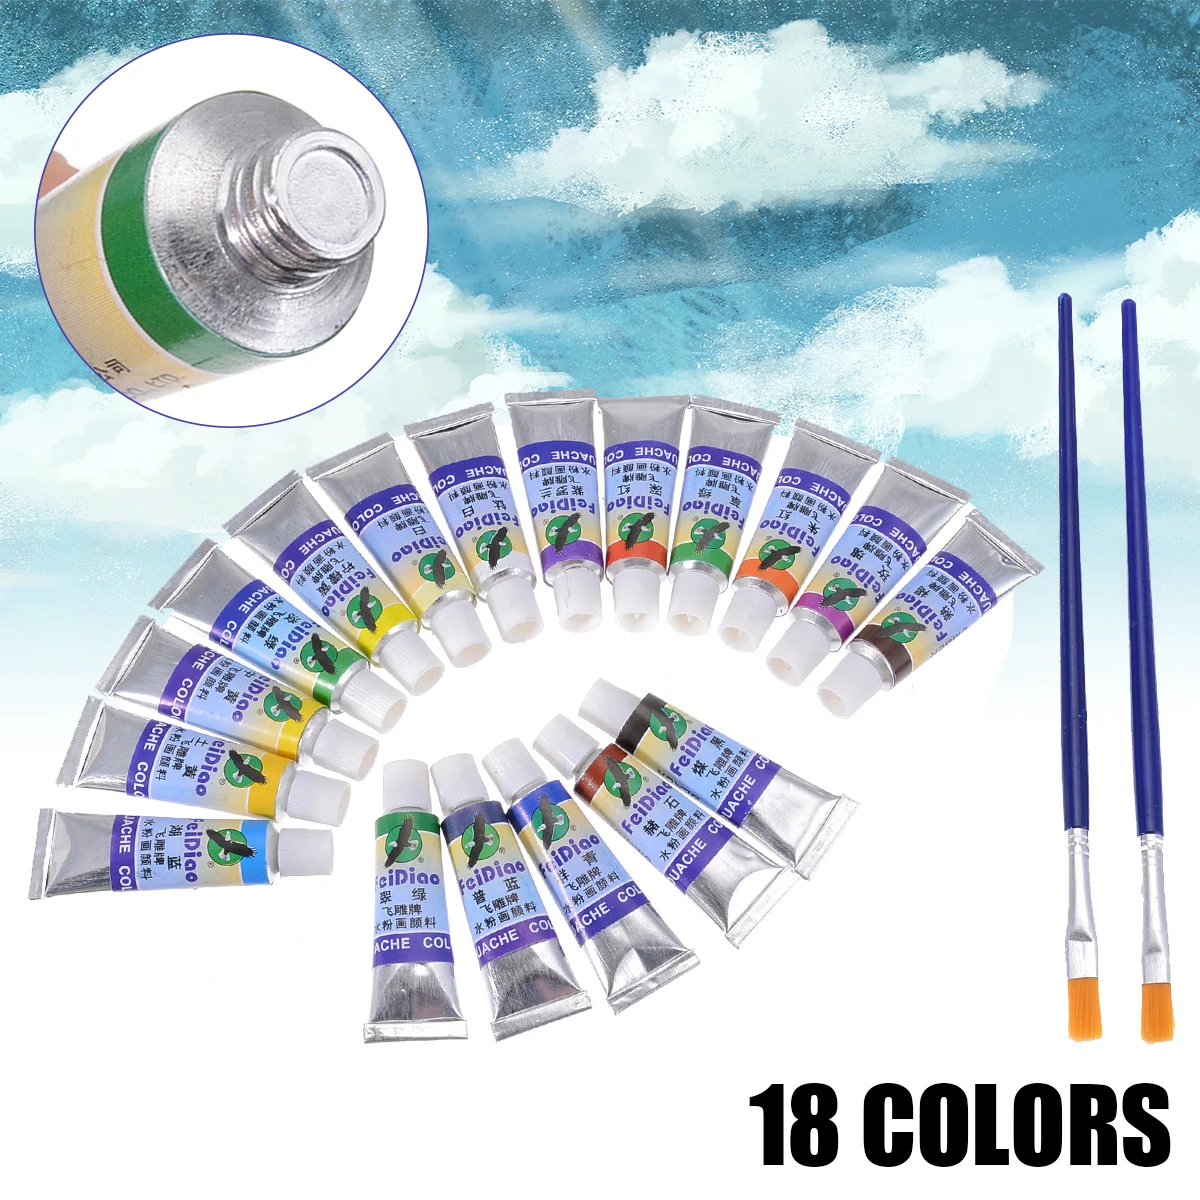 

18 Colors 5ml Watercolor Draw Tube Pigment Set Professional Gouache Paint DIY Artist Painting Supplies With 2pcs Brushes